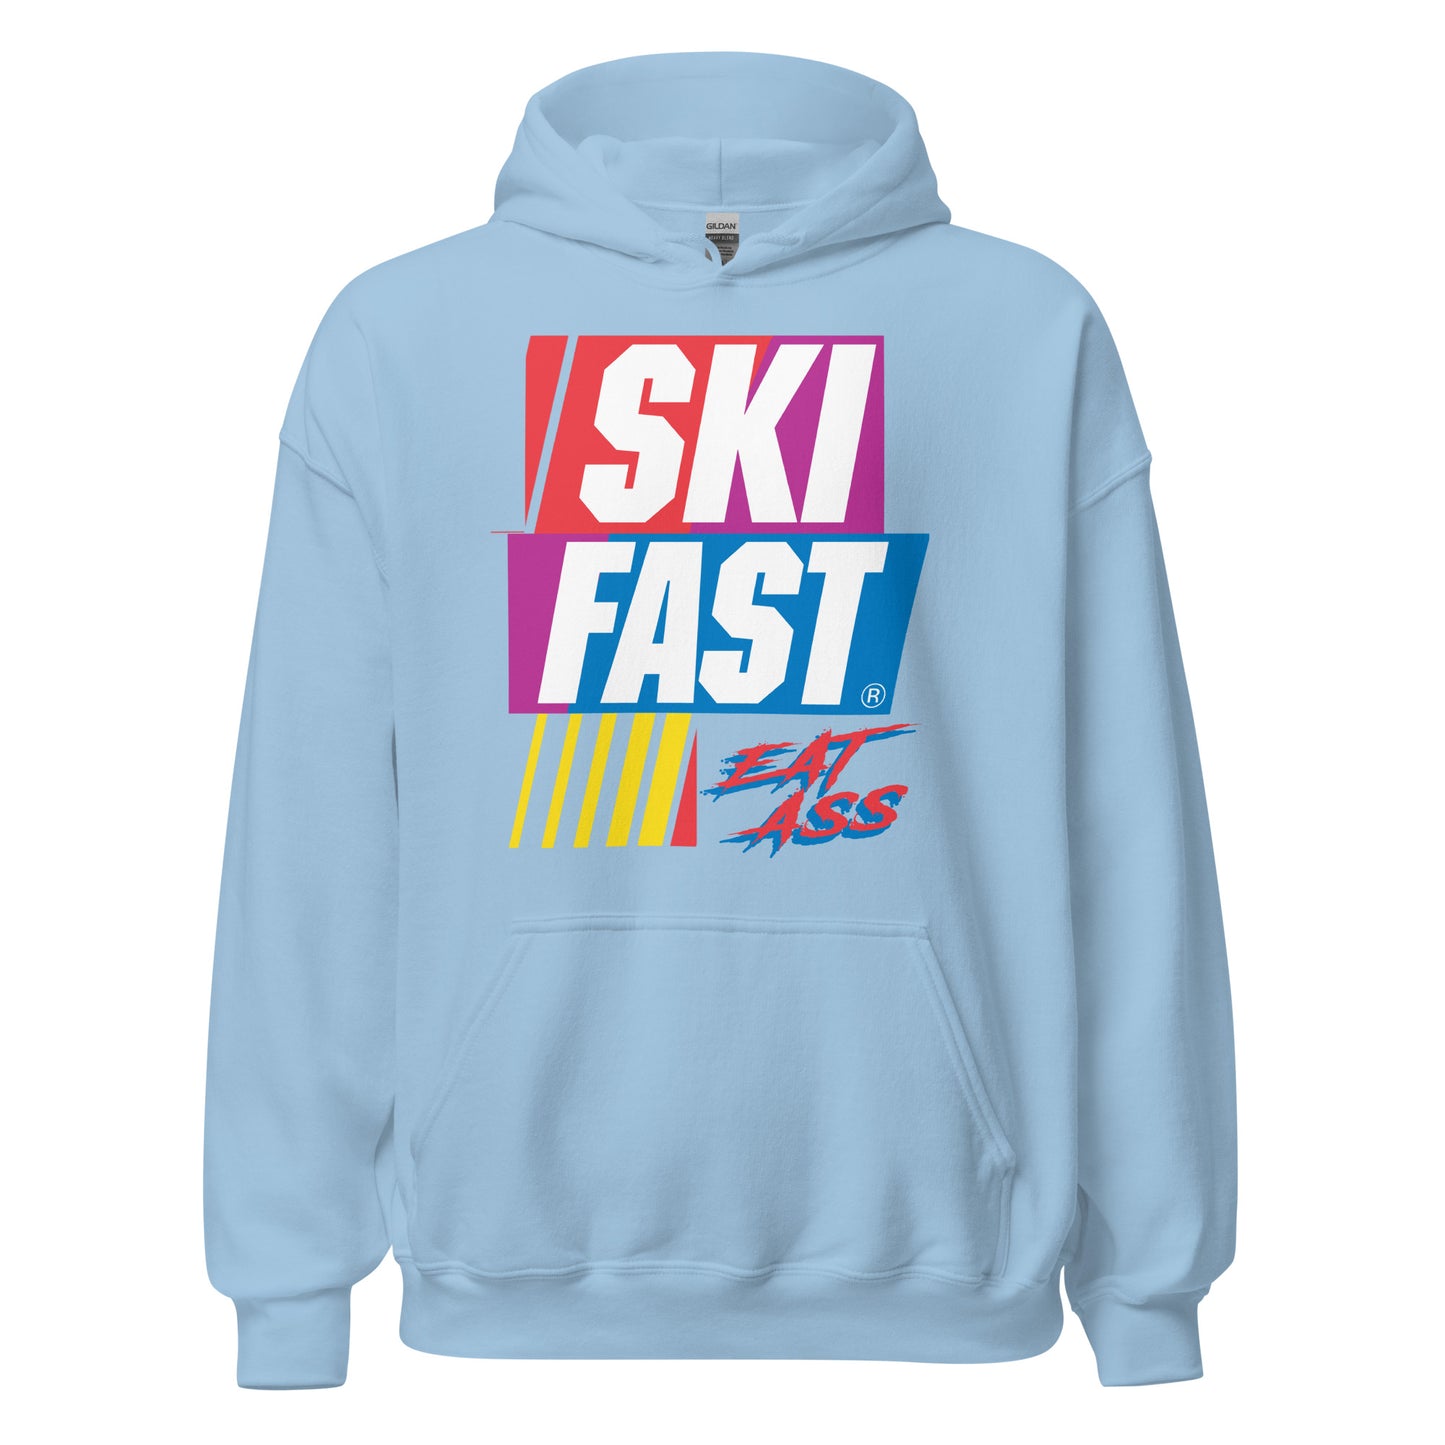 Ski fast eat ass printed hoodie by Whistler Shirts